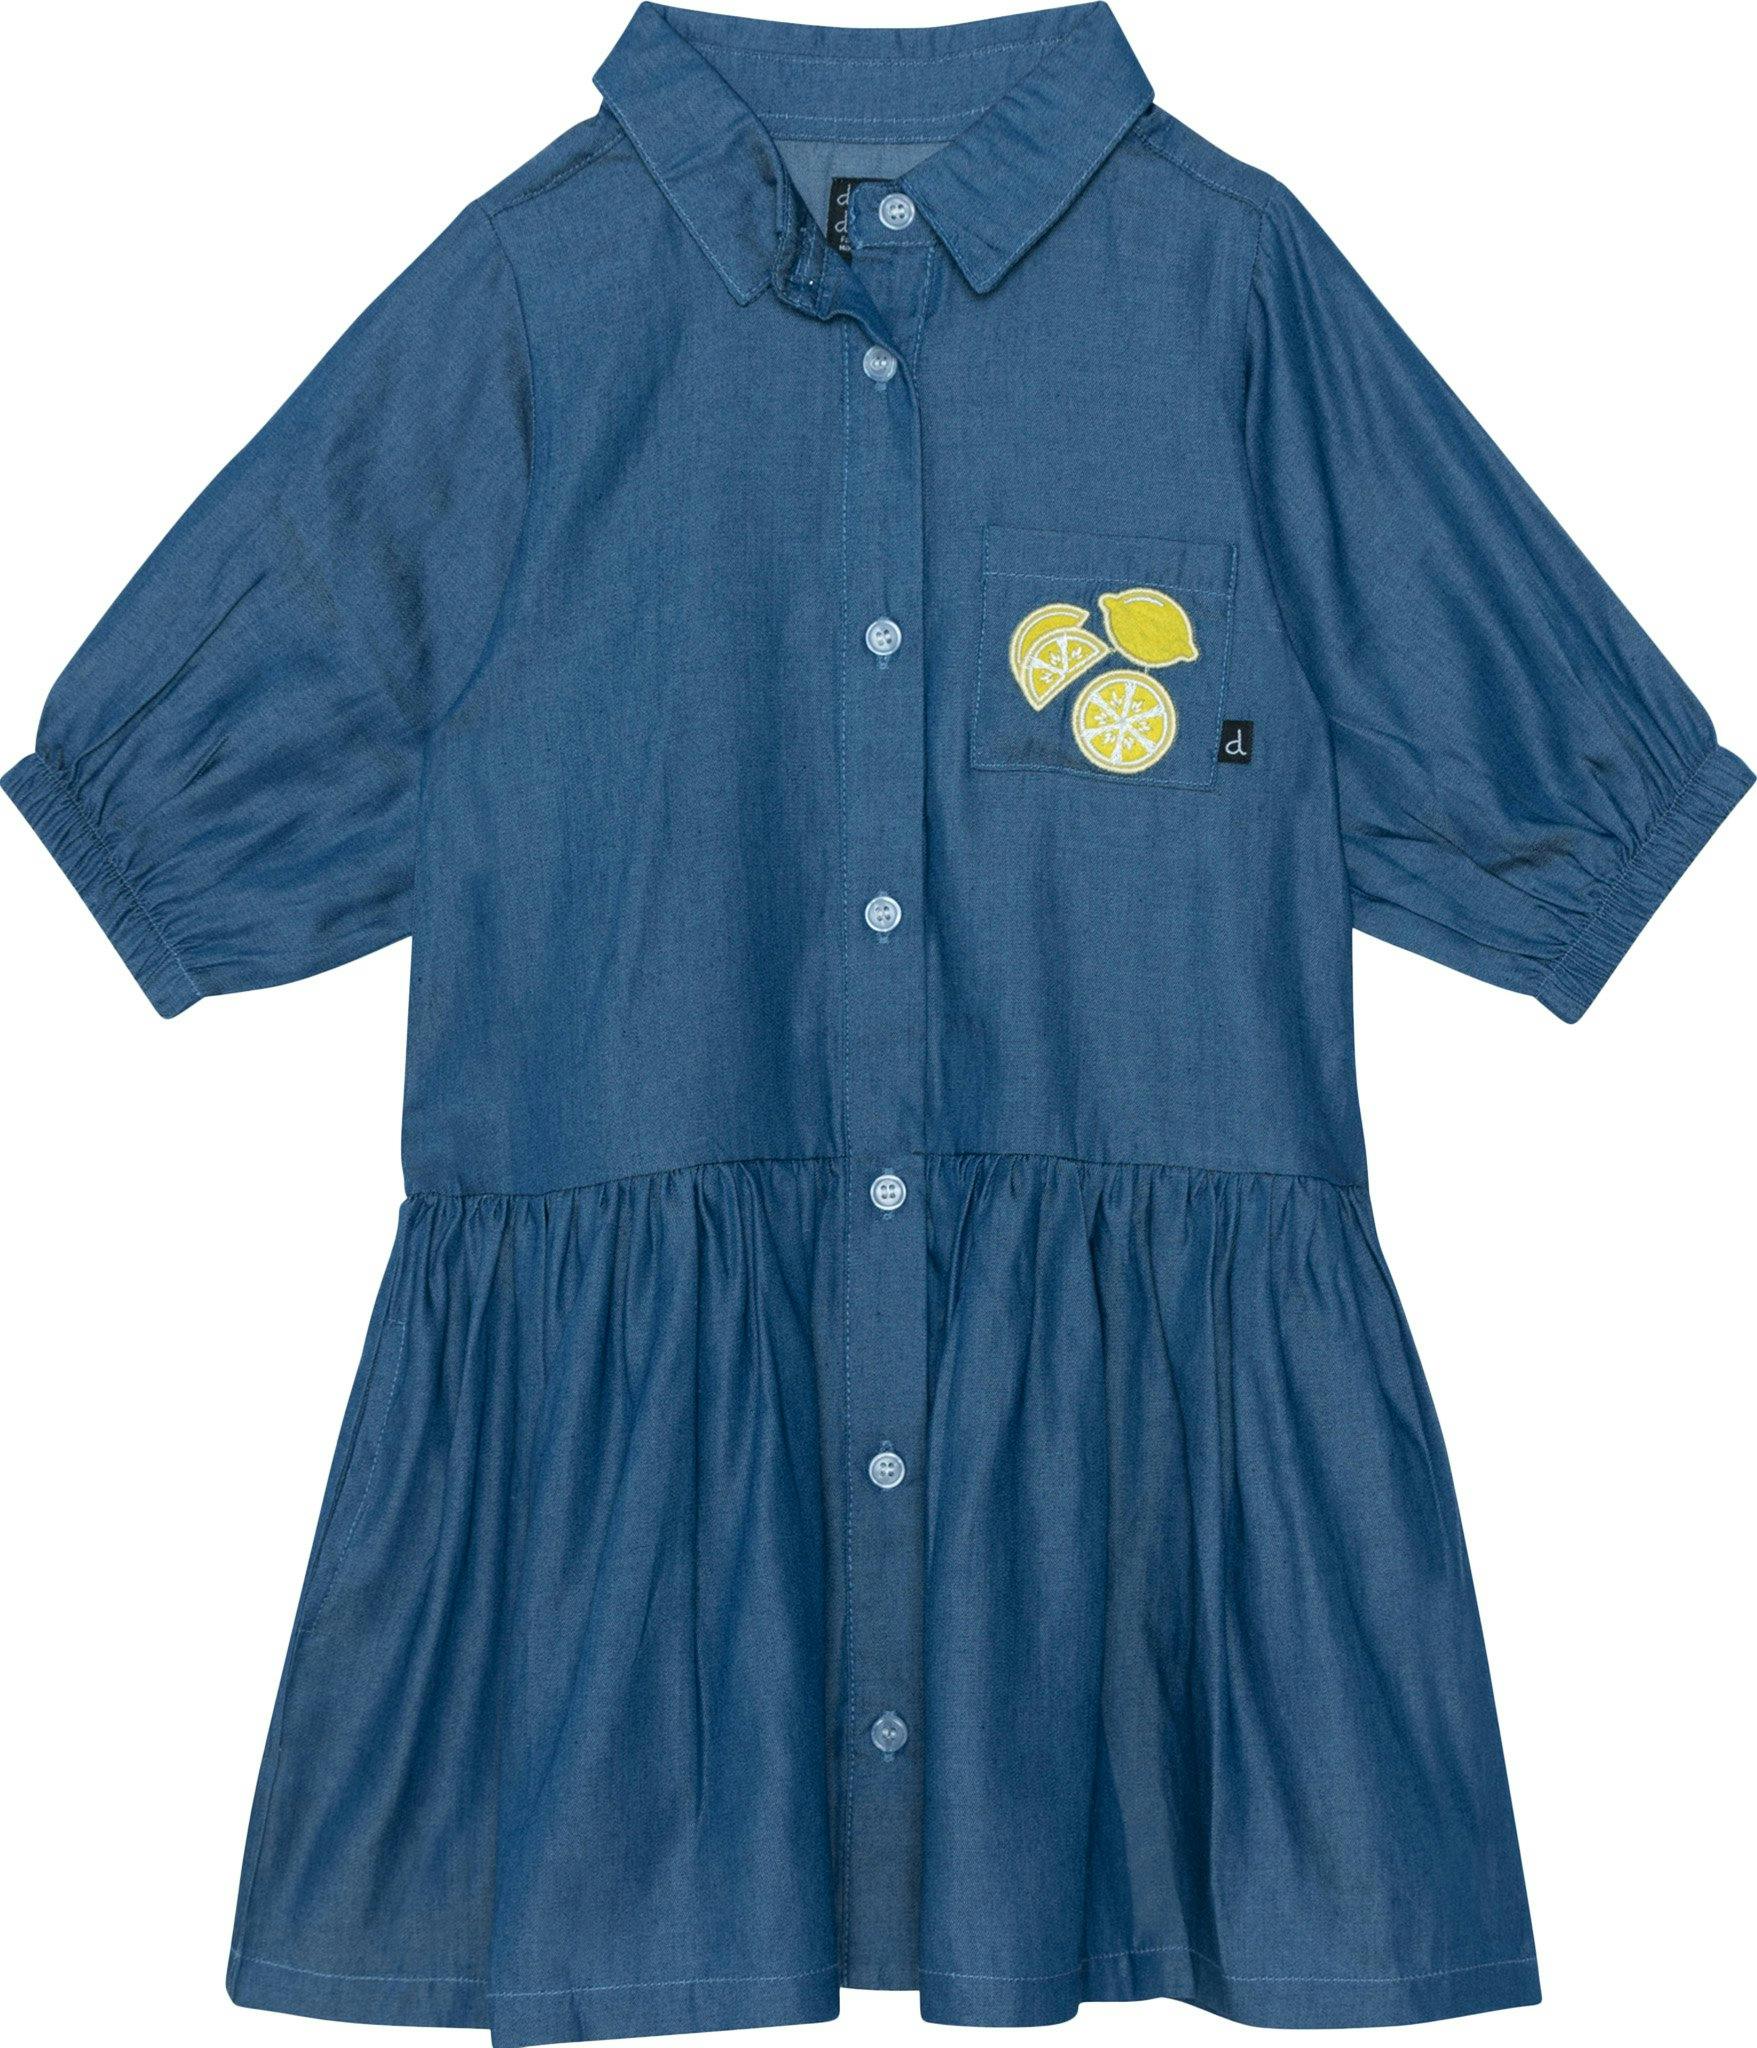 Product image for 3/4 Sleeve Dress with Pocket - Little Girls